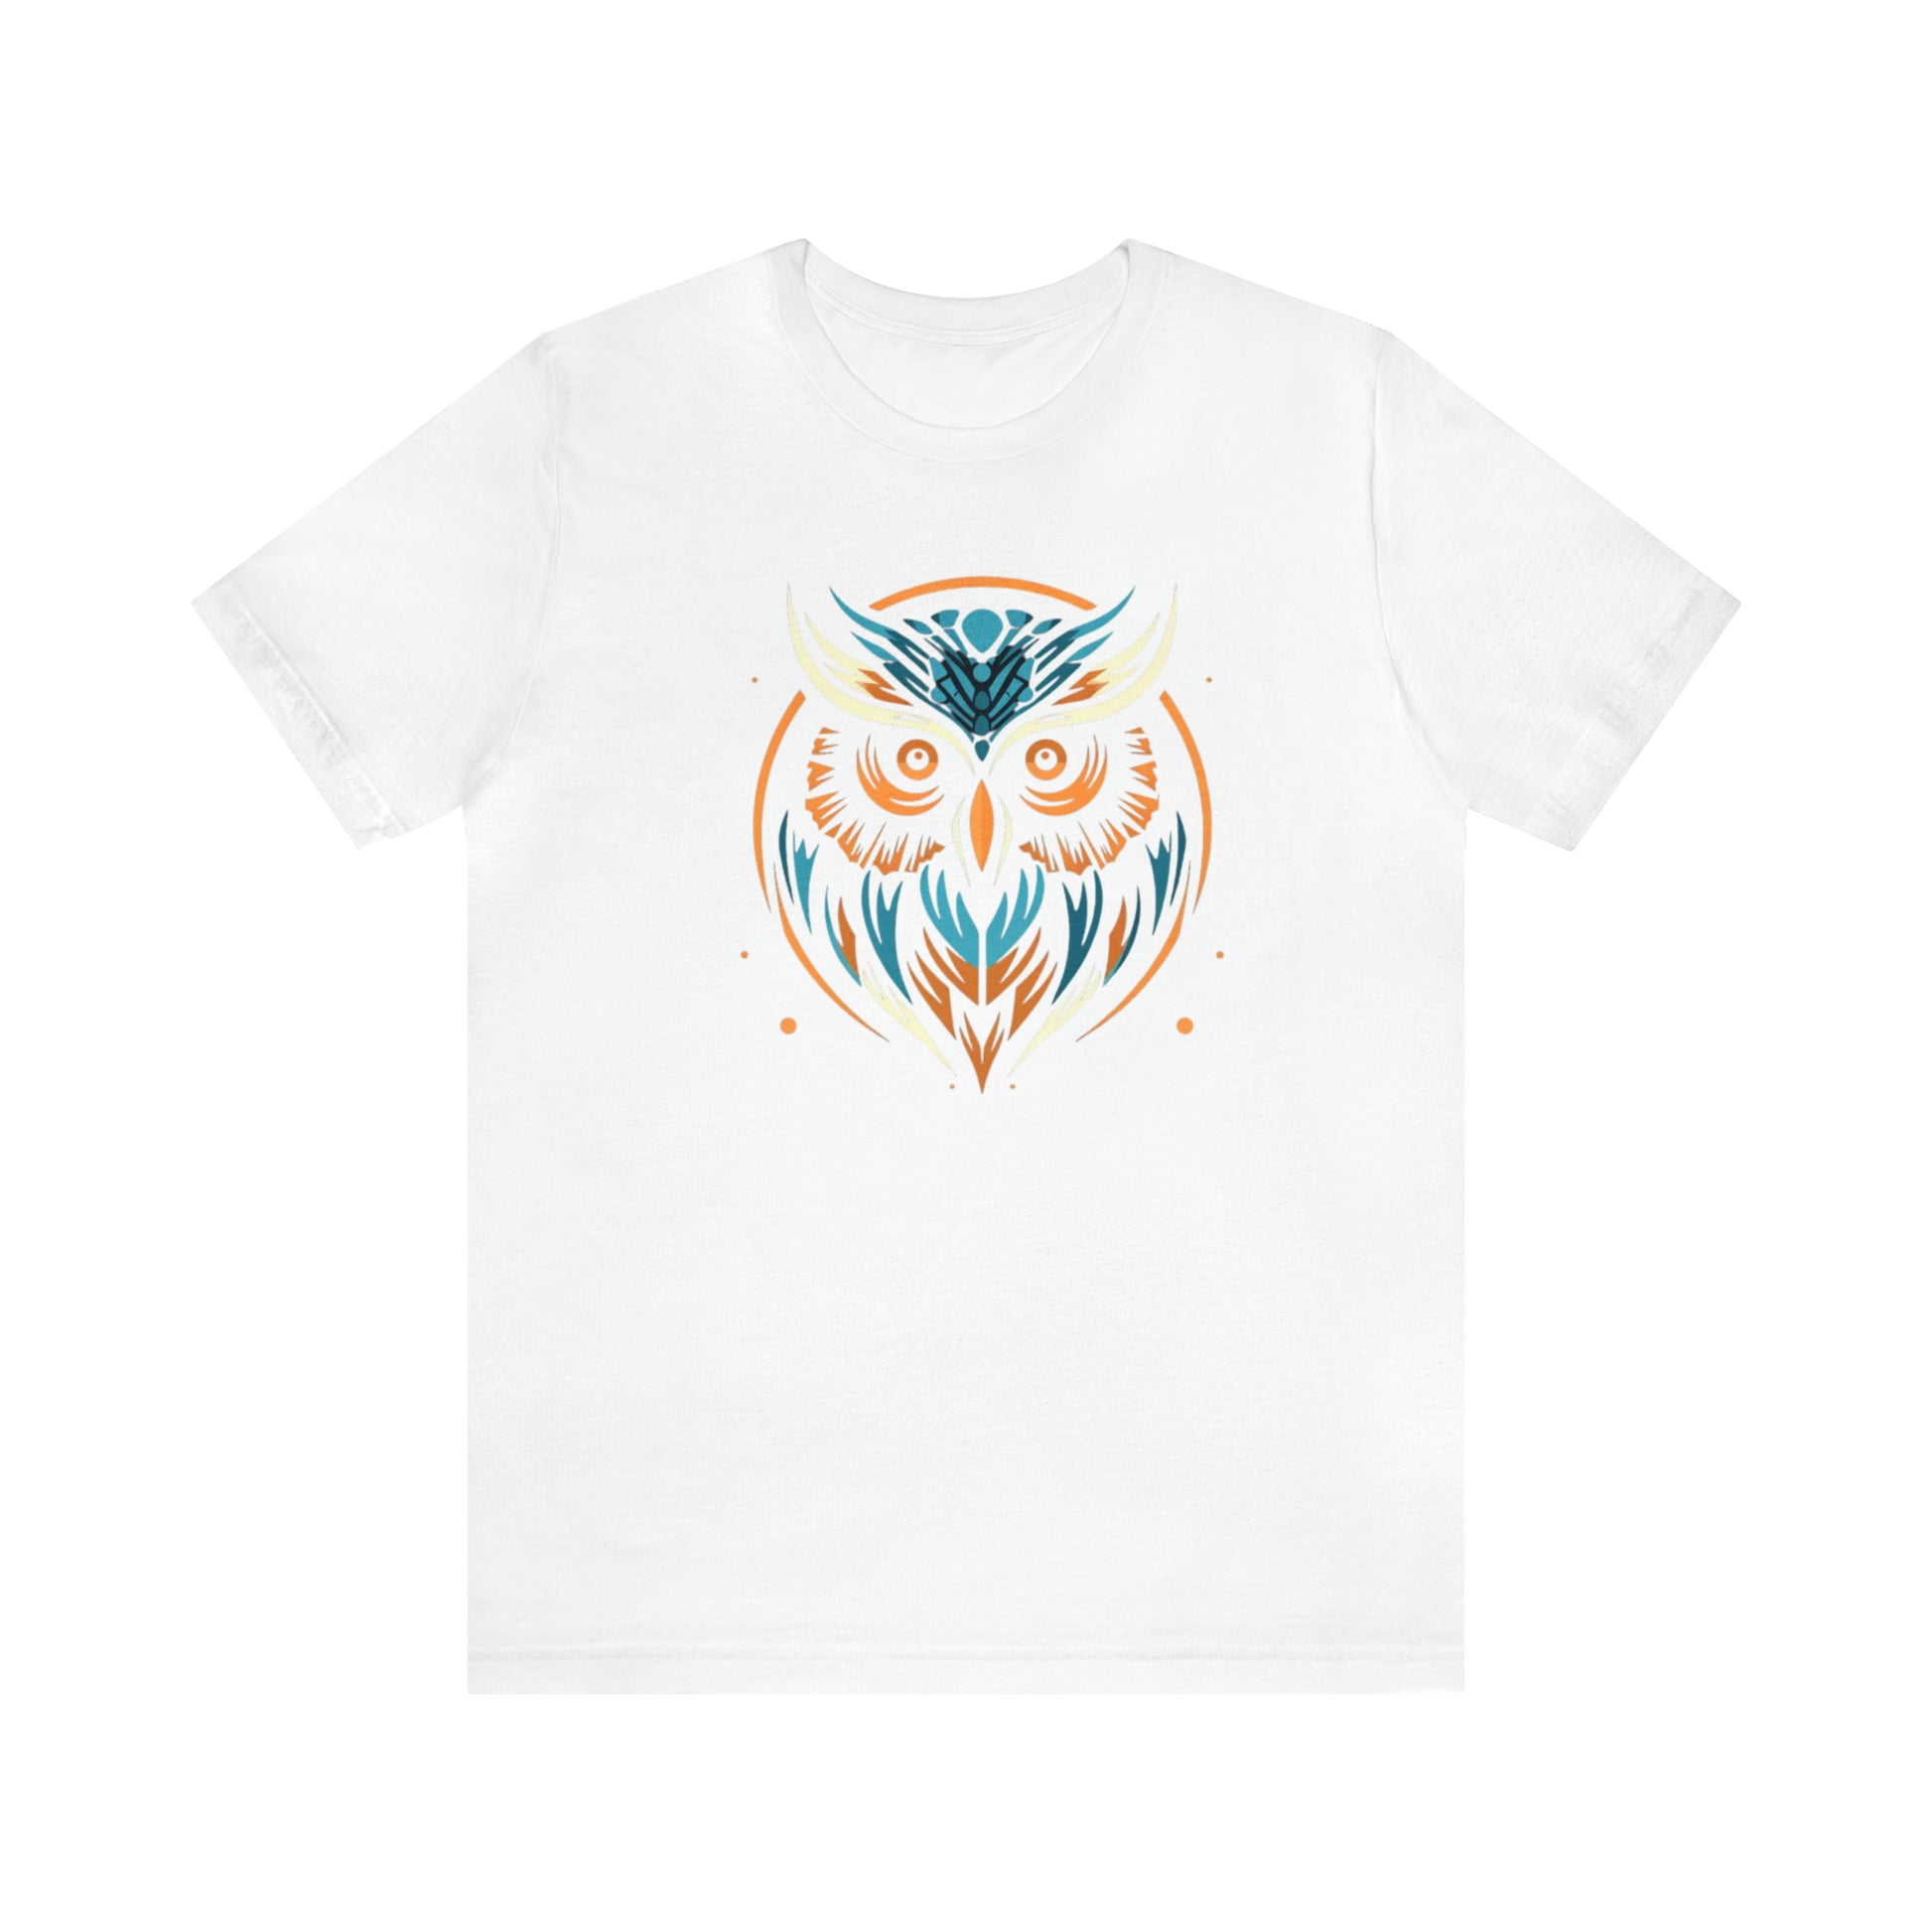 Unisex Jersey Short Sleeve Tee, Patriotic Shirts, Patriotic Shirts and stand up for what you believe in - owl2you